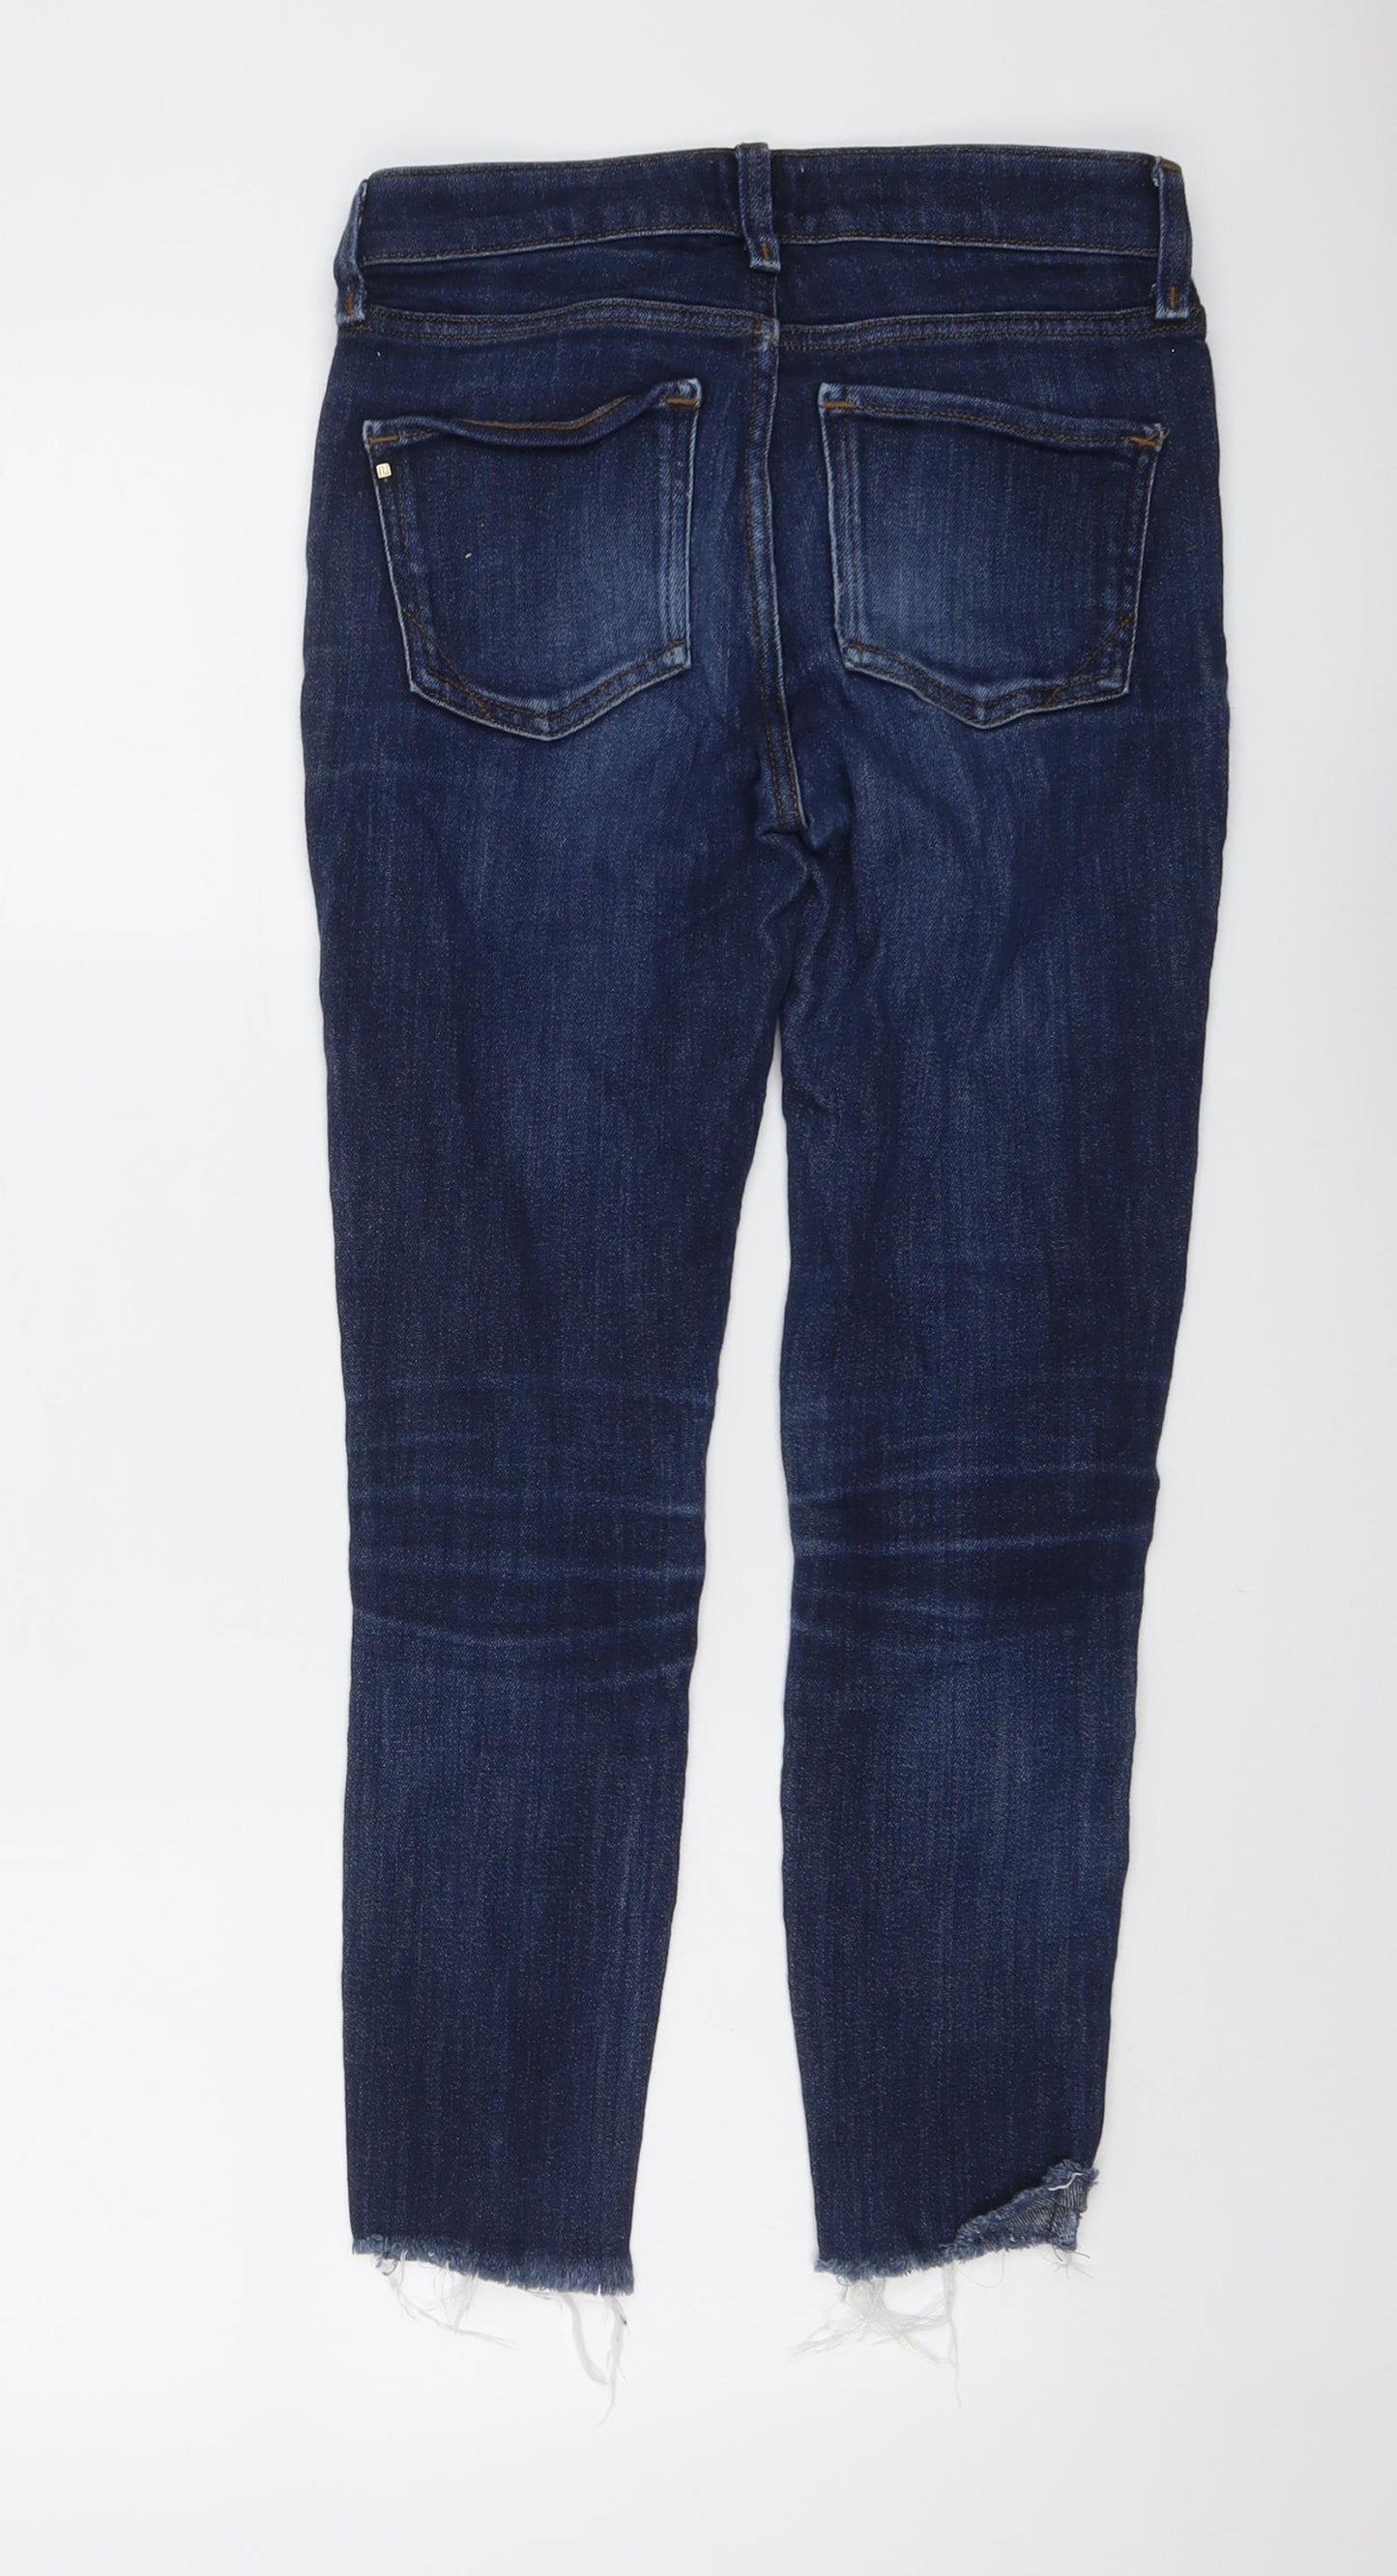 River Island Womens Blue Cotton Skinny Jeans Size 6 L24 in Regular Button